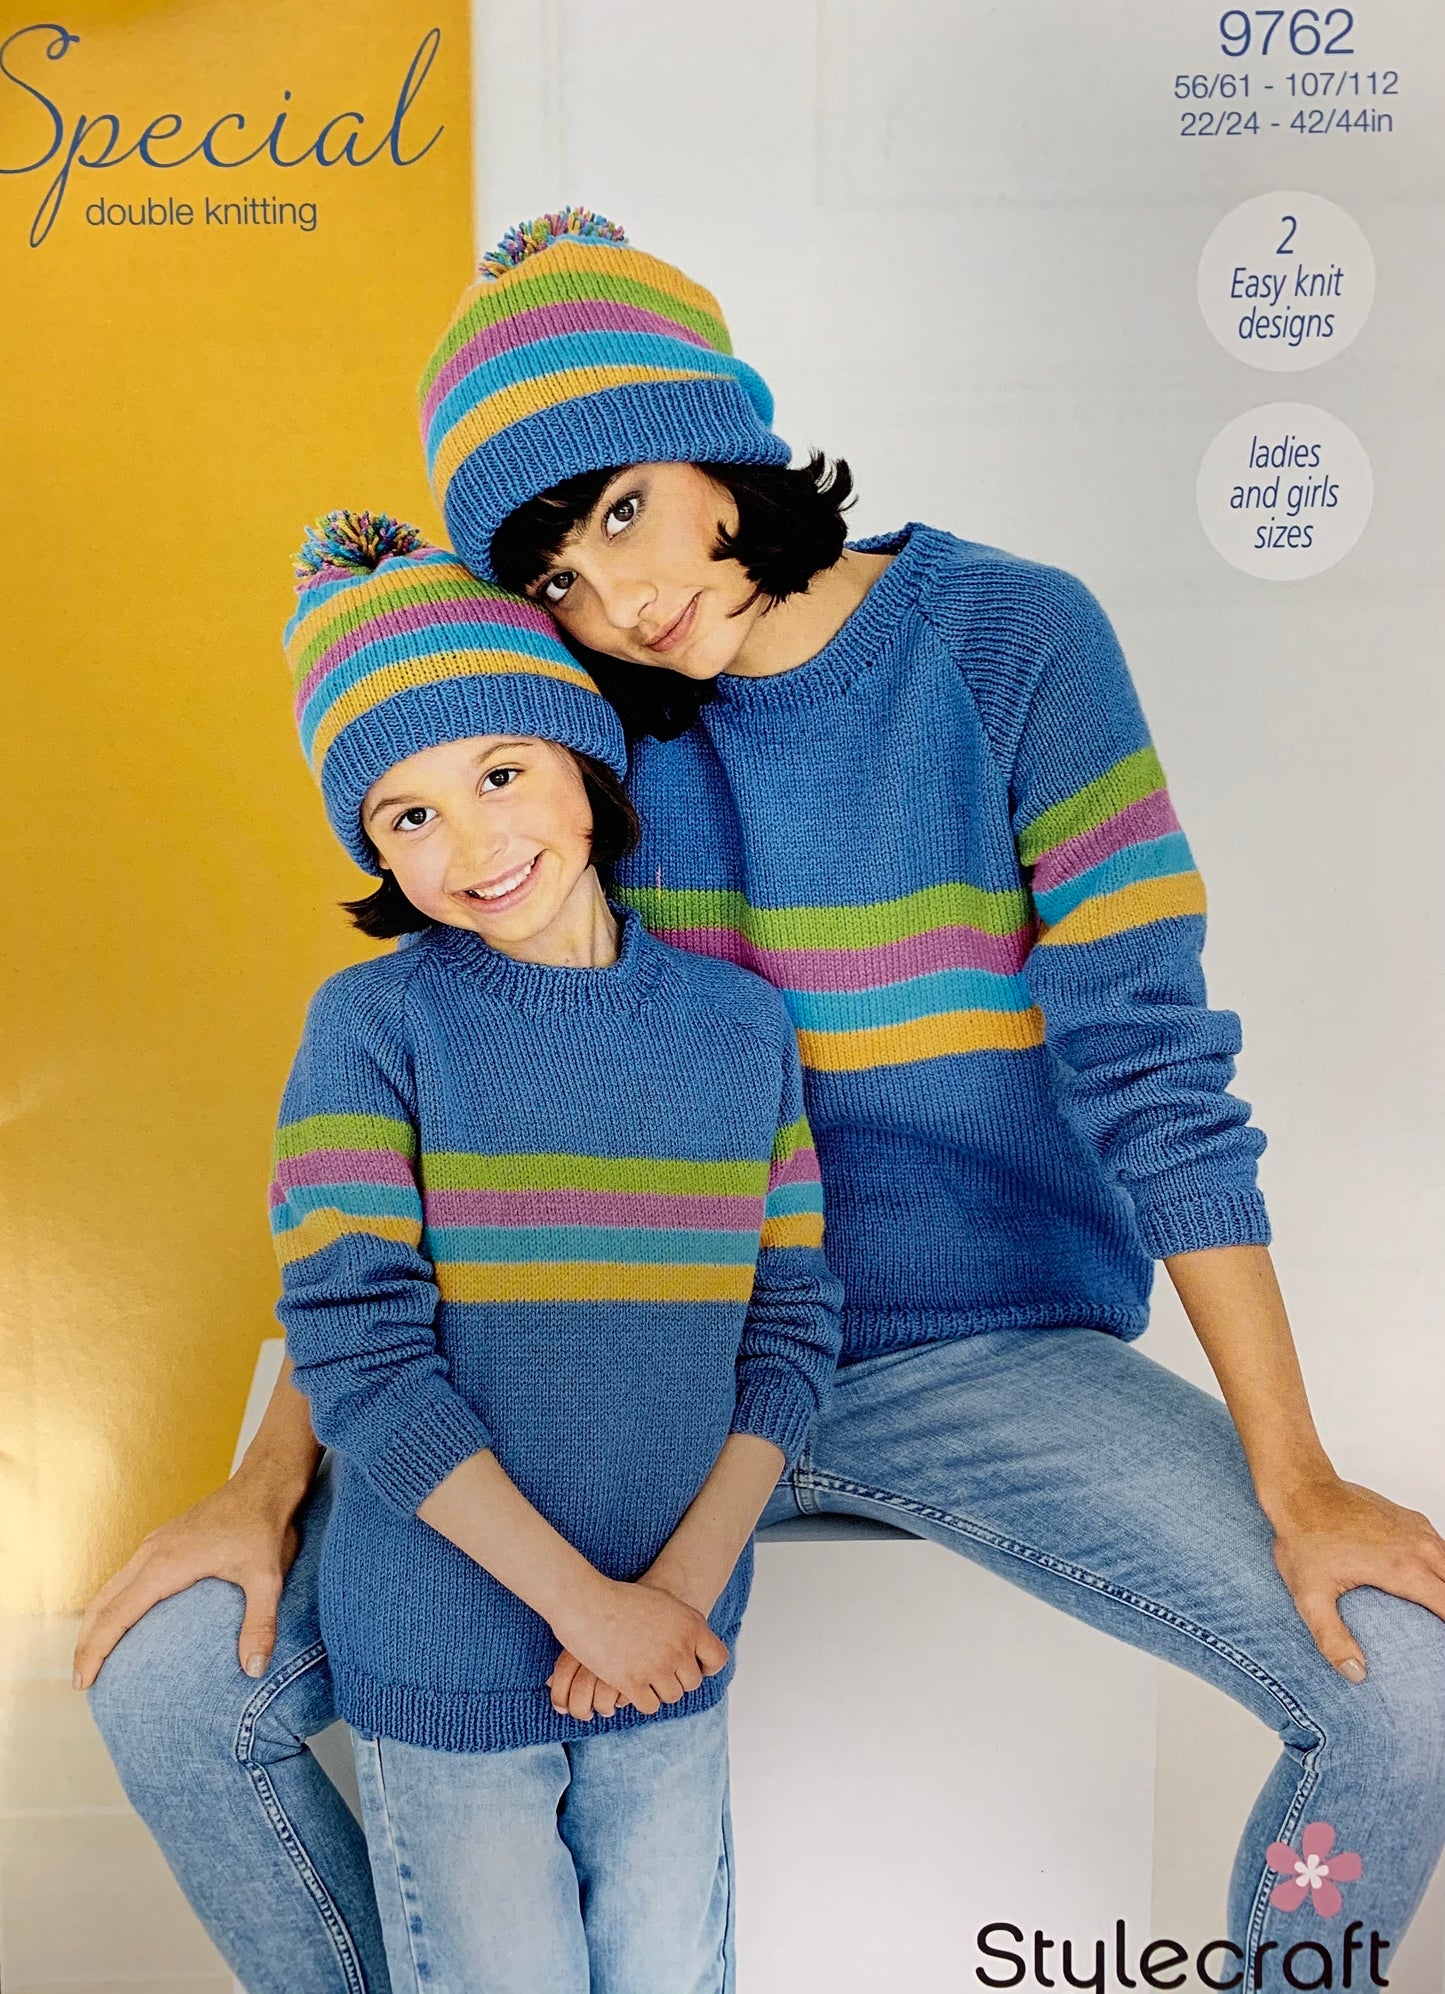 9762 Stylecraft Special dk ladies and child sweater and hat knitting pattern